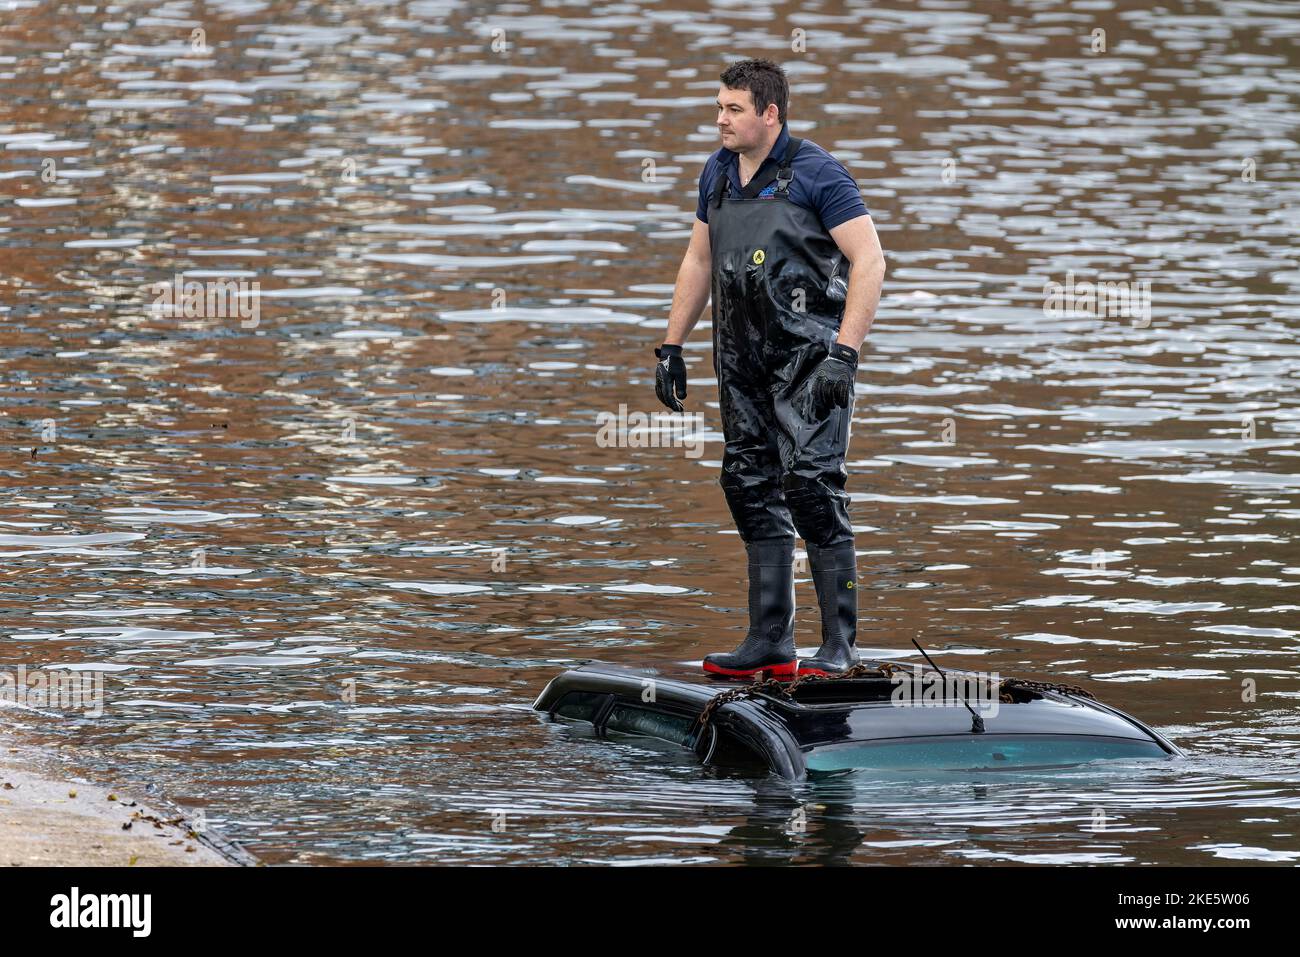 Rescue worker standing on top of roof of submerged car driven into River Avon by accident in Stratford upon Avon, Warwickshire, UK on 8 November 2022 Stock Photo